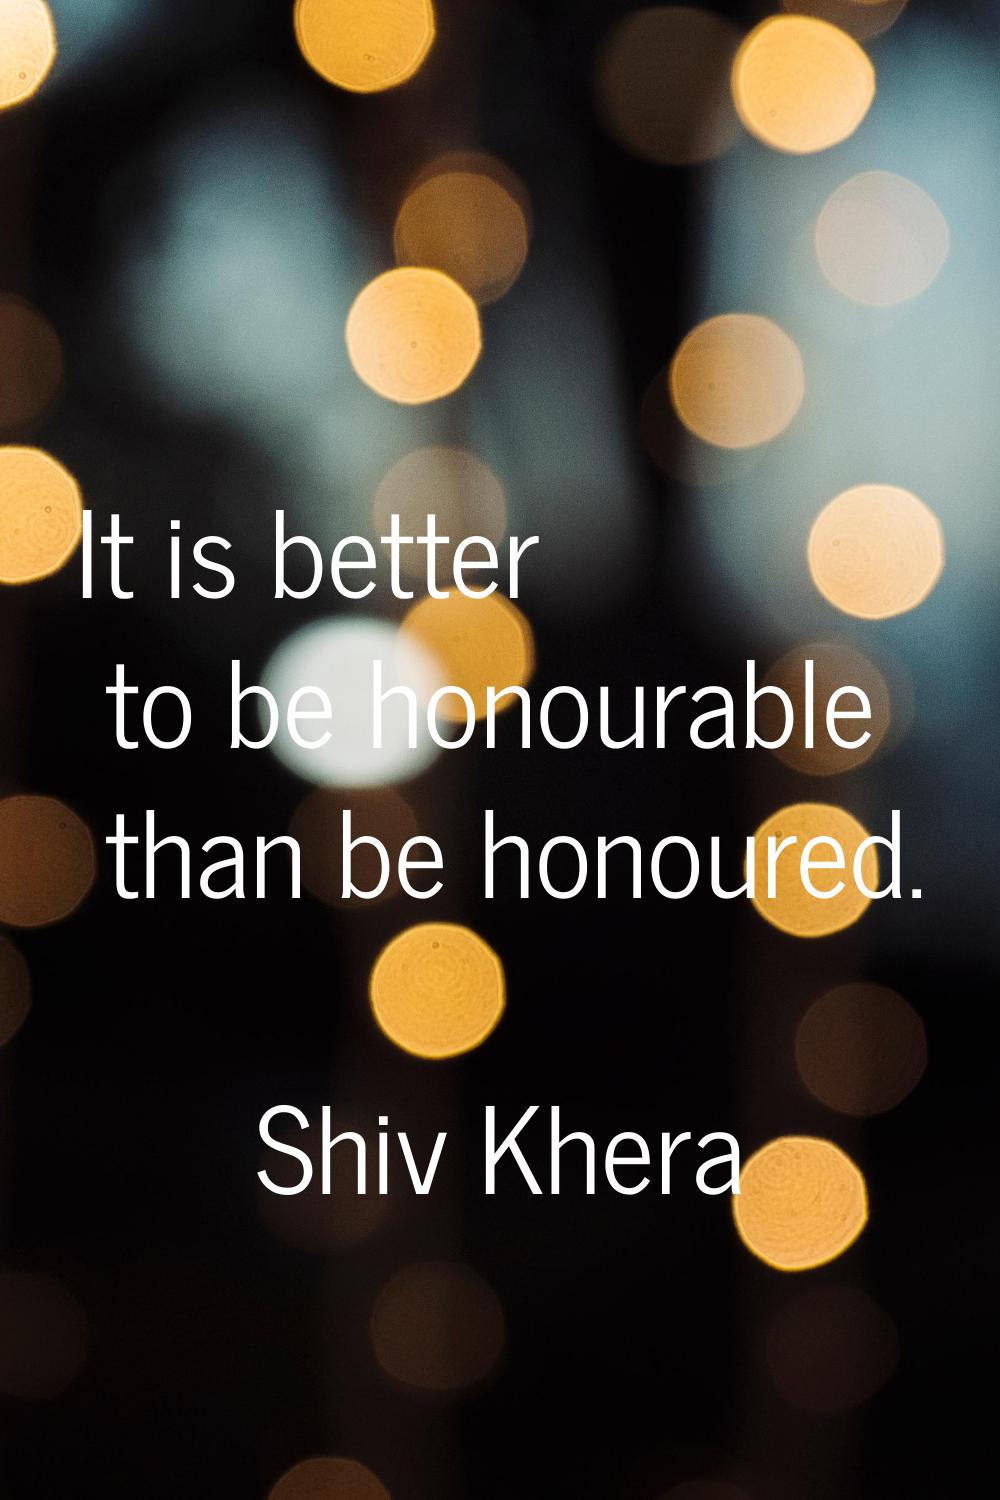 It is better to be honourable than be honoured.